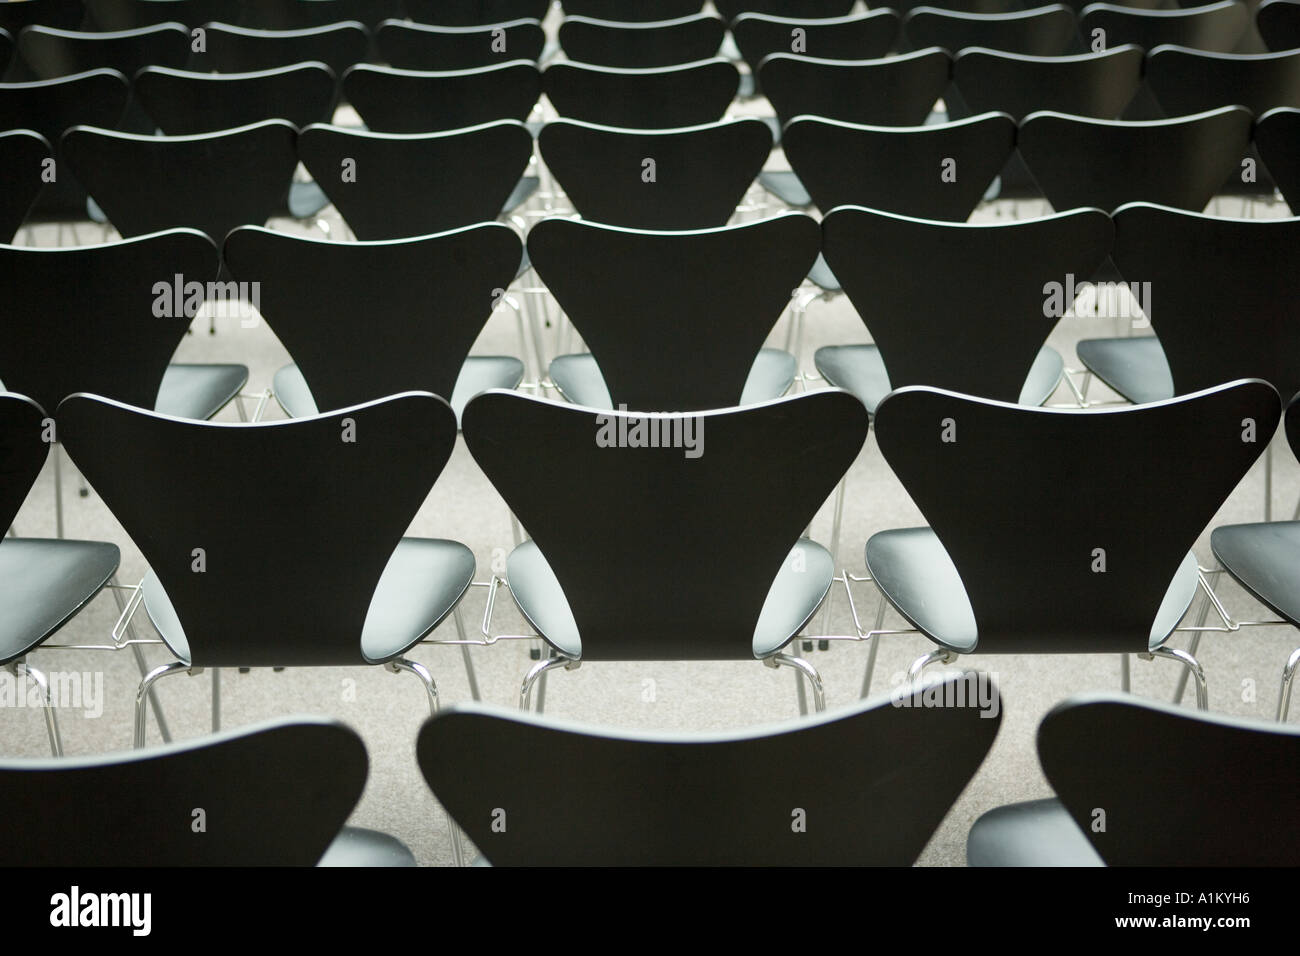 Rows of seats in hall Stock Photo